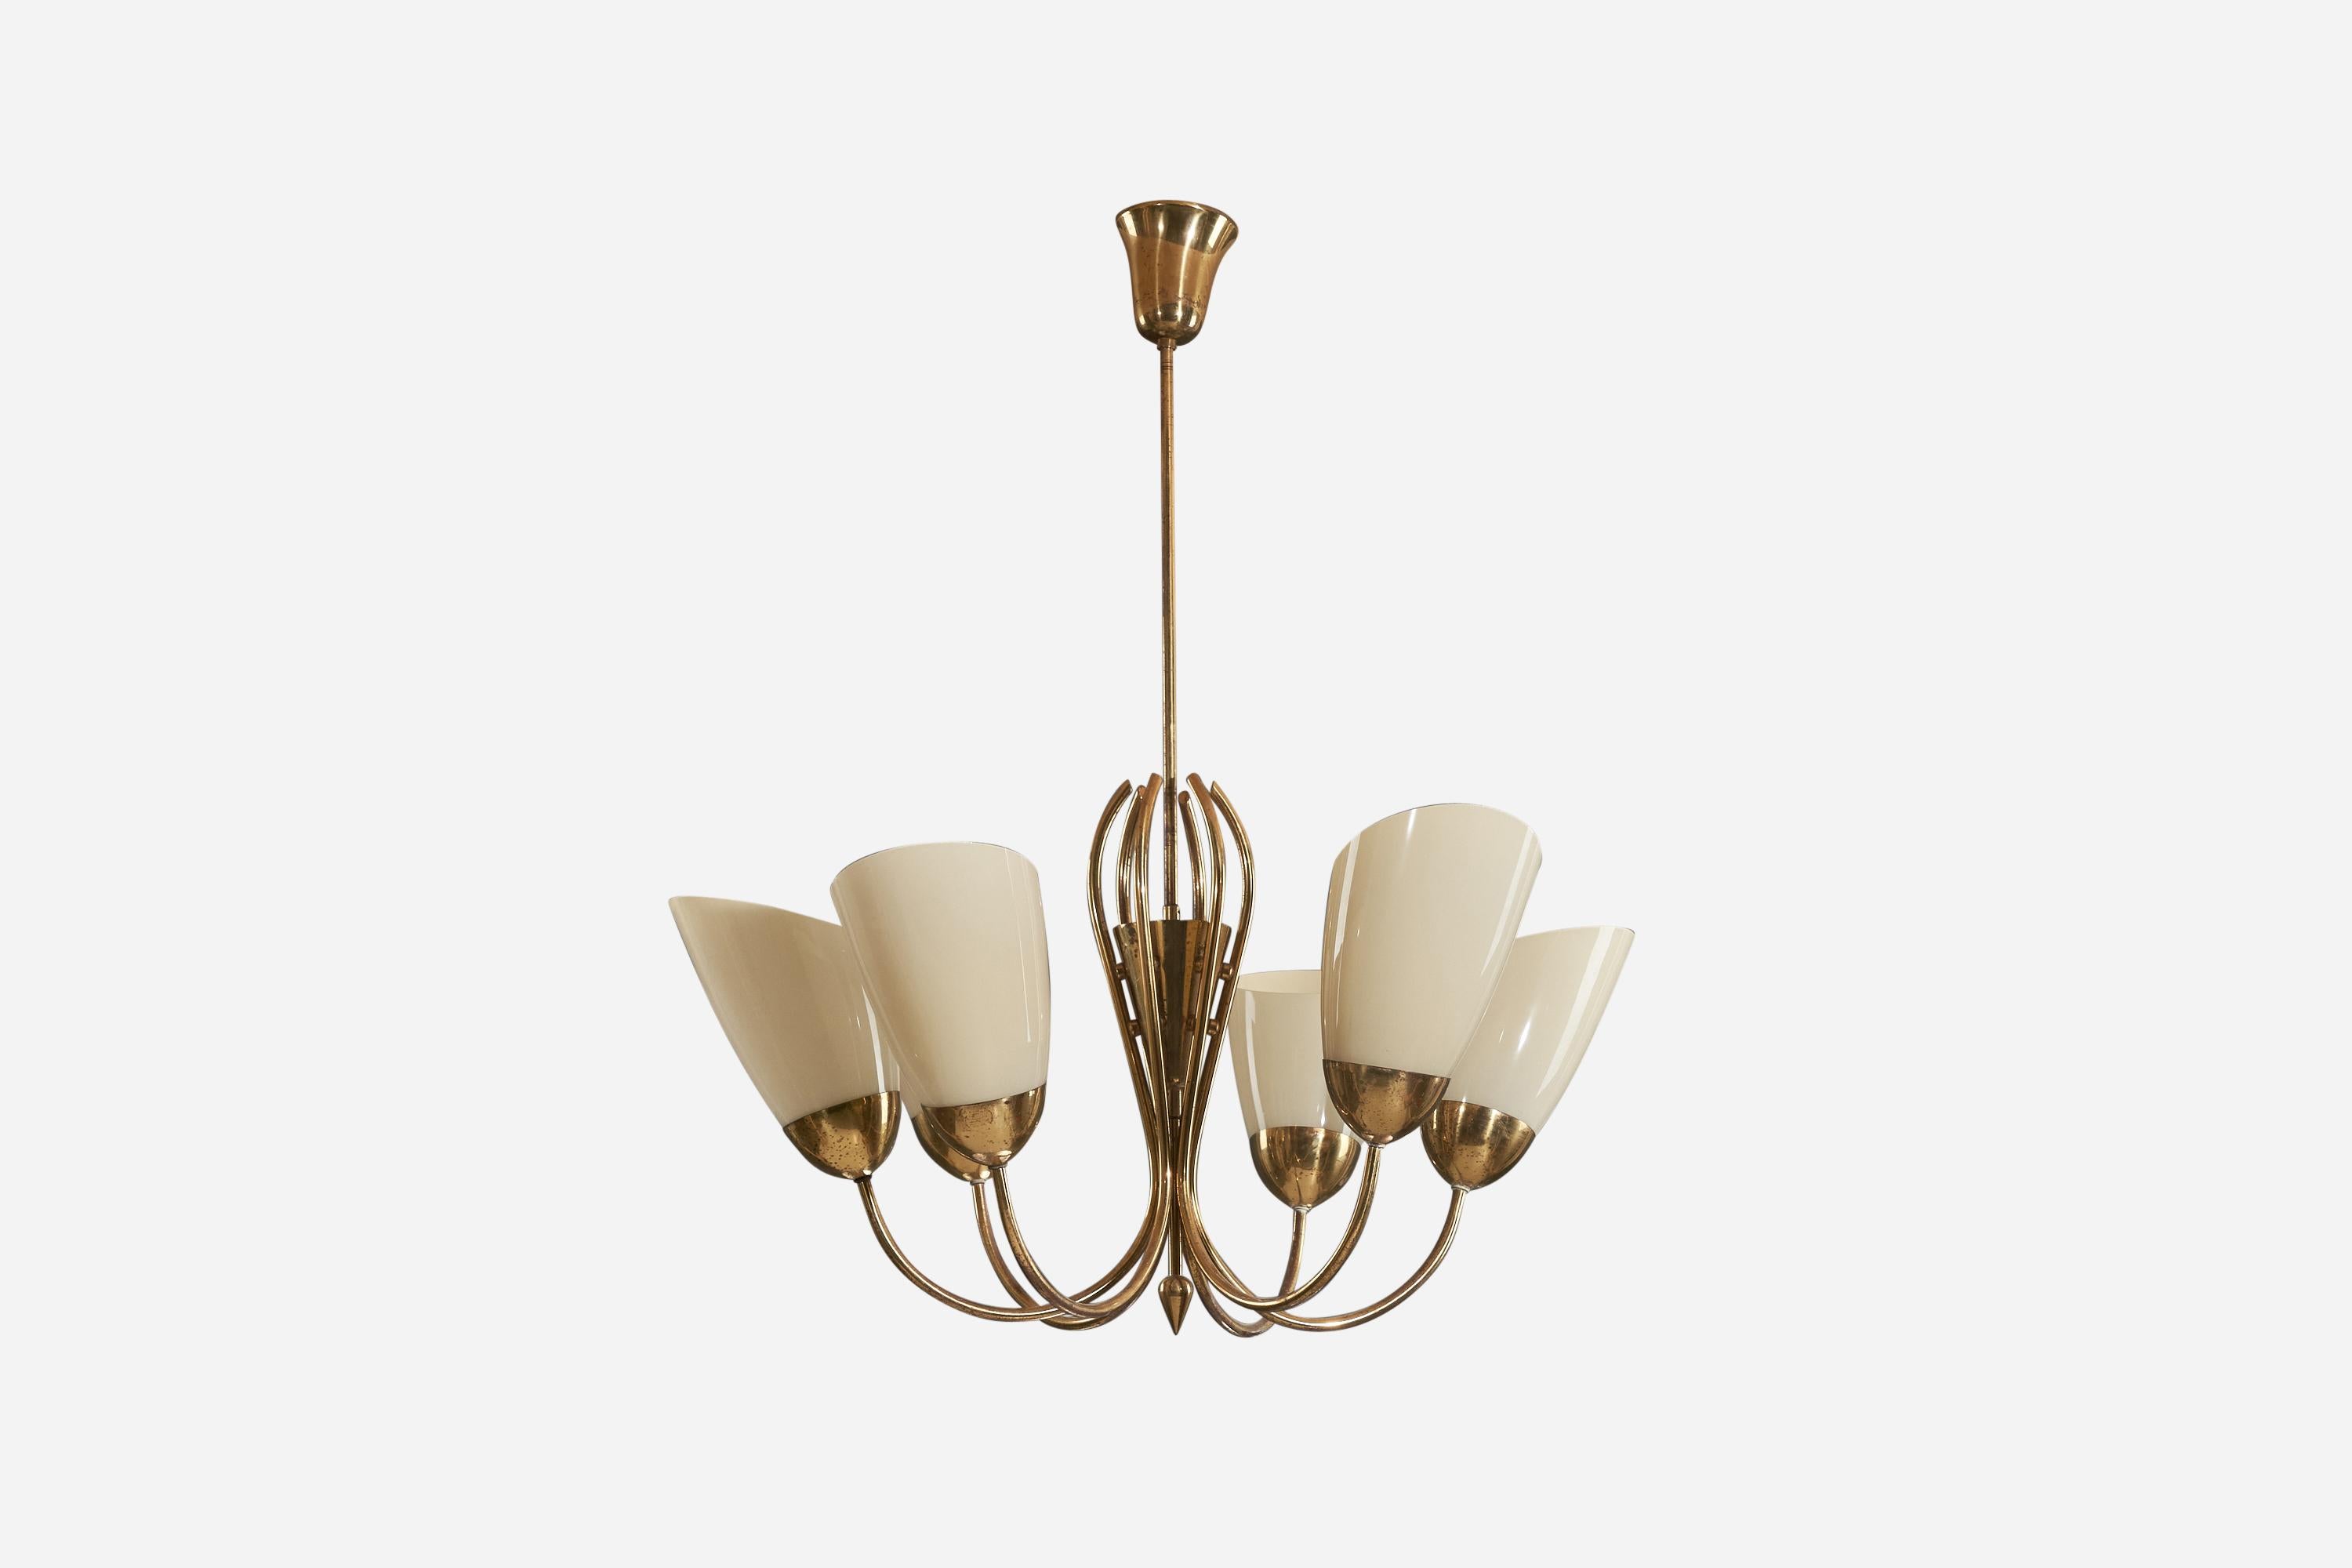 A brass and glass six-armed chandelier designed by Mauri Almari and produced by Idman, Finland, 1950s.